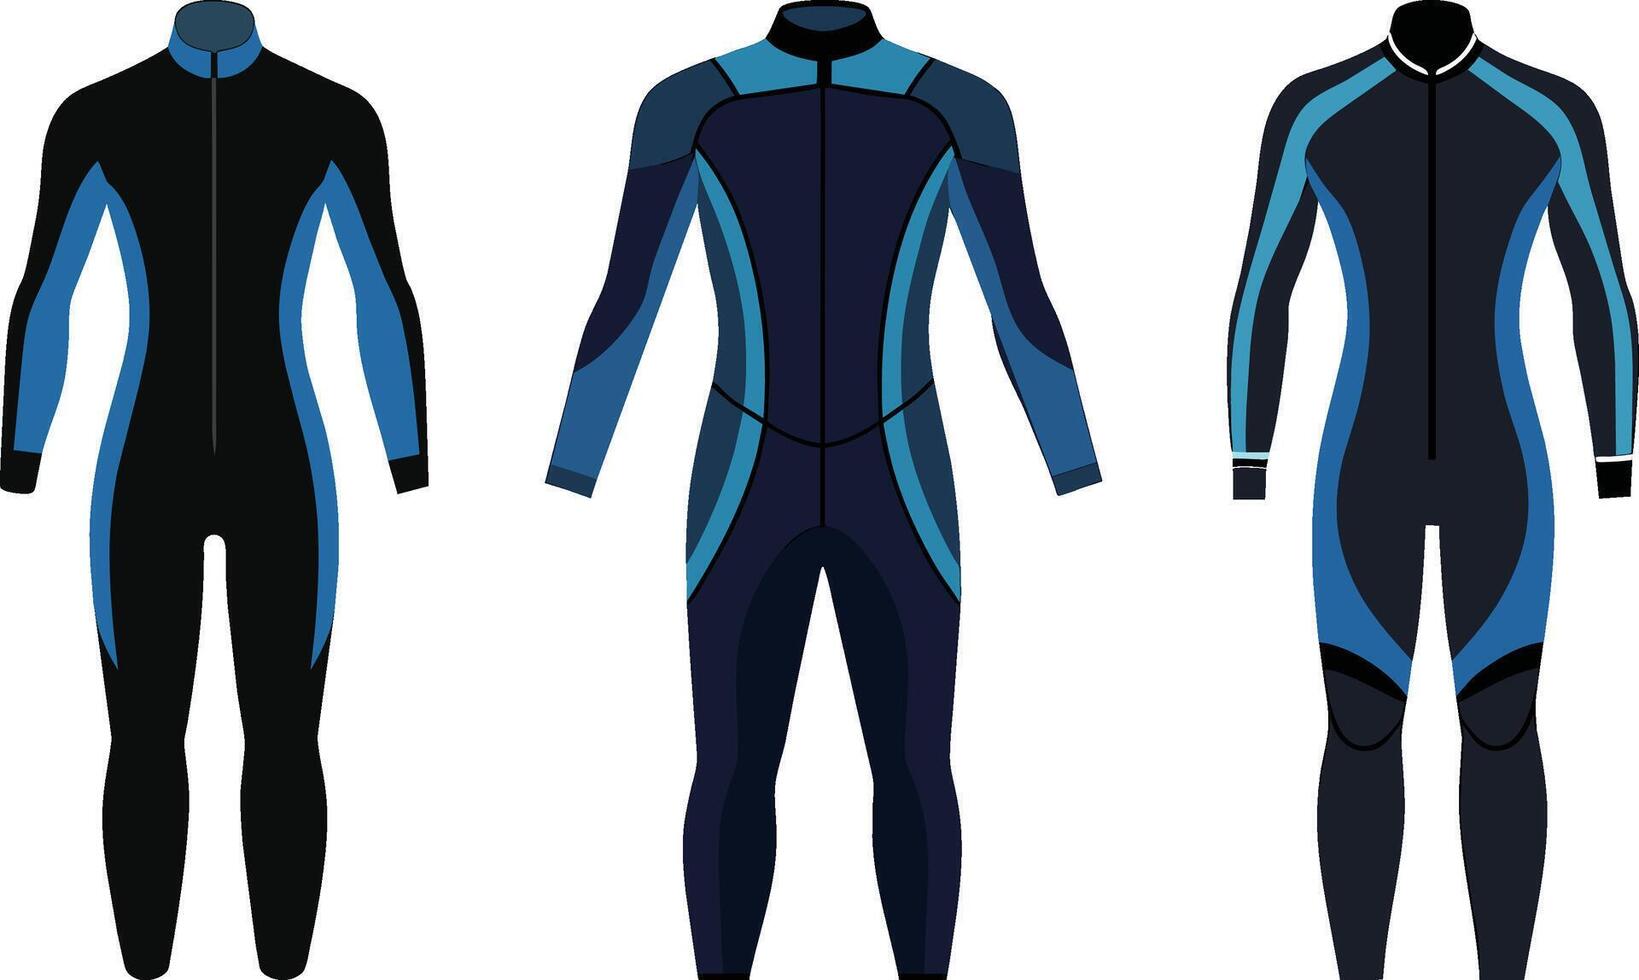 Wetsuit for scuba diving. illustration isolated on white background. vector